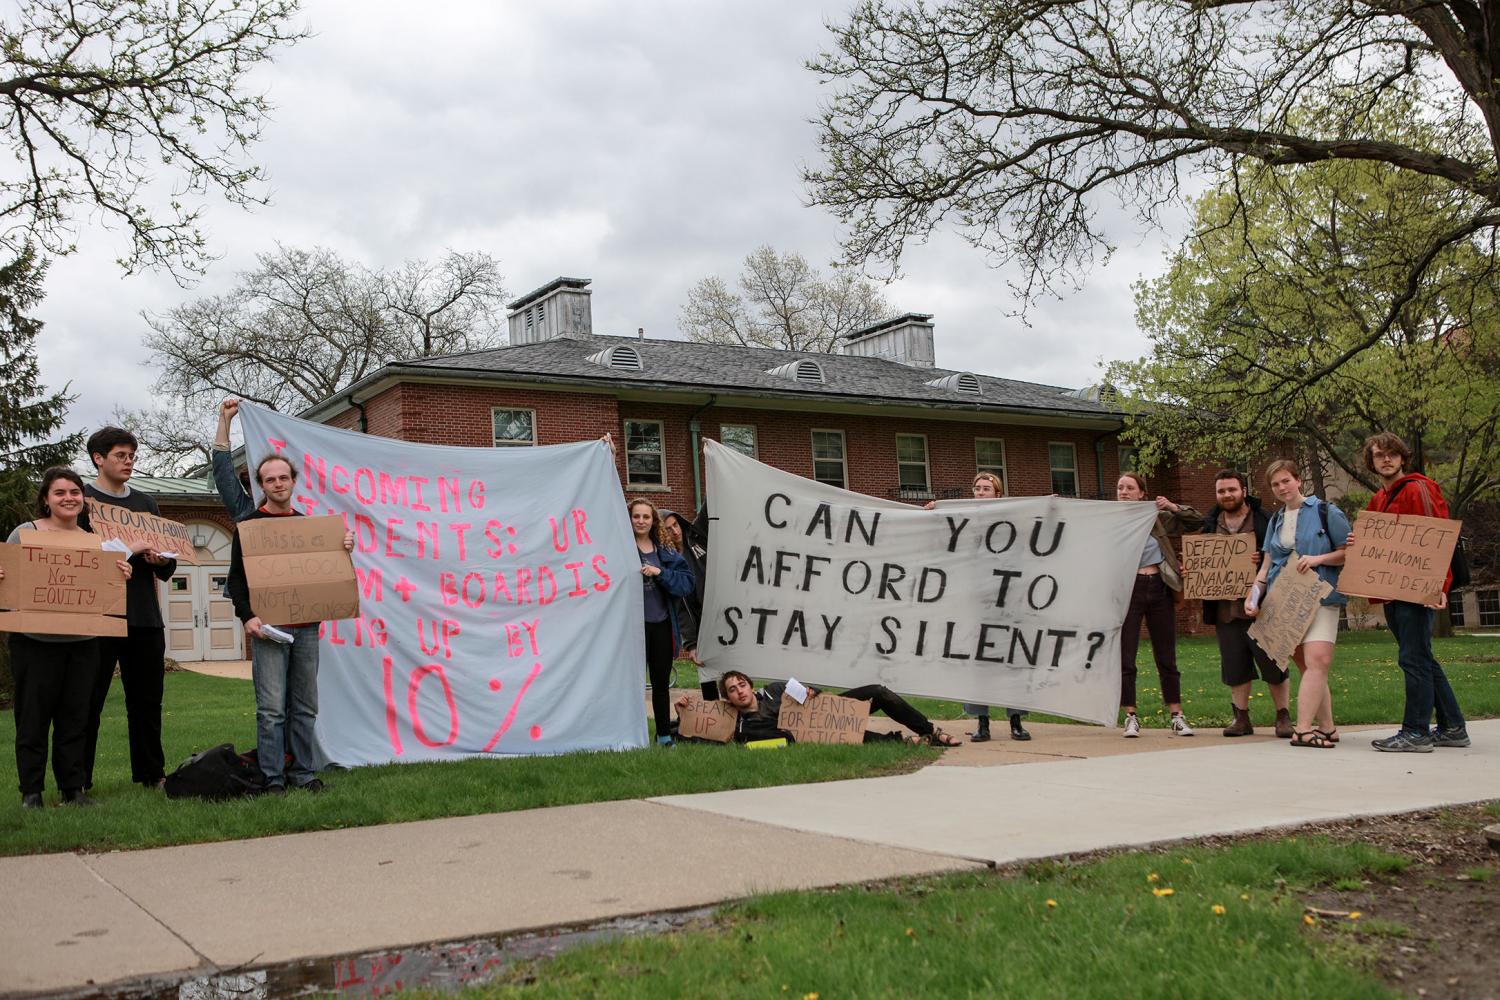 Students protest against the administration’s new housing, dining and OSCA financial aid policies last Friday. The protest was one of many actions in opposition to the changes, leading to today’s meeting between OSCA officers and the administration.